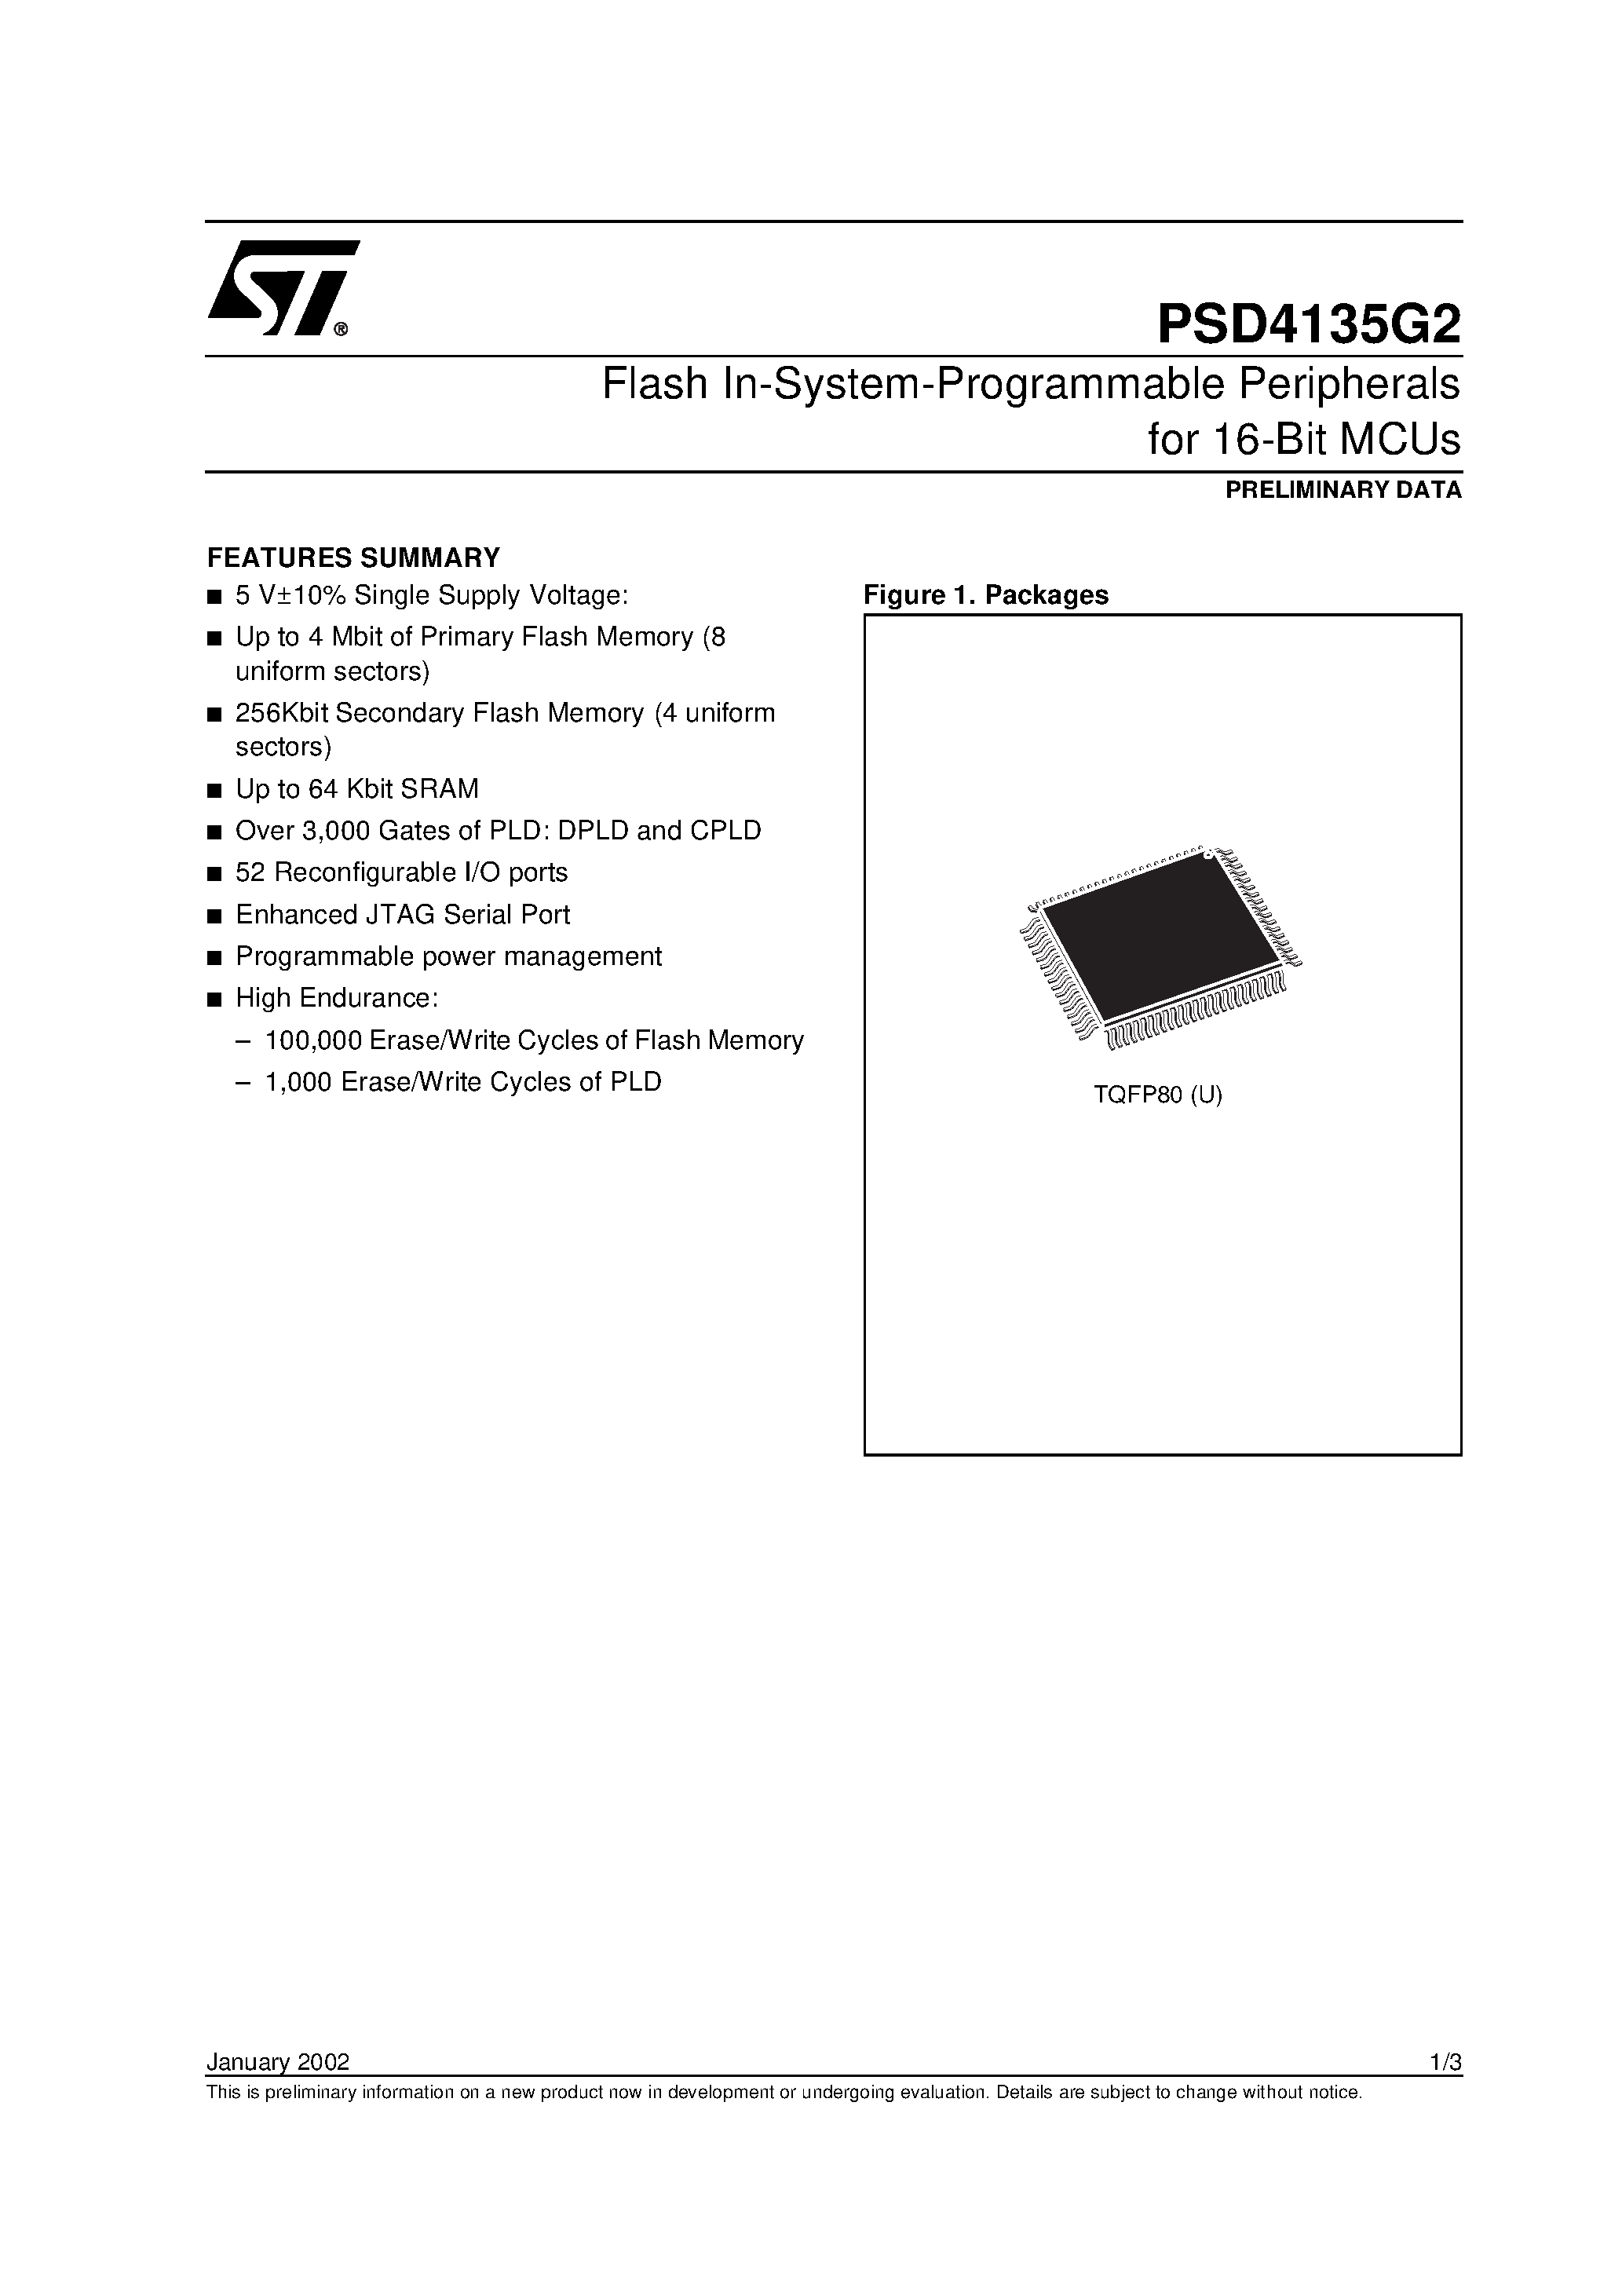 Даташит PSD4135F1-B-15B81I - Flash In-System-Programmable Peripherals for 16-Bit MCUs страница 1